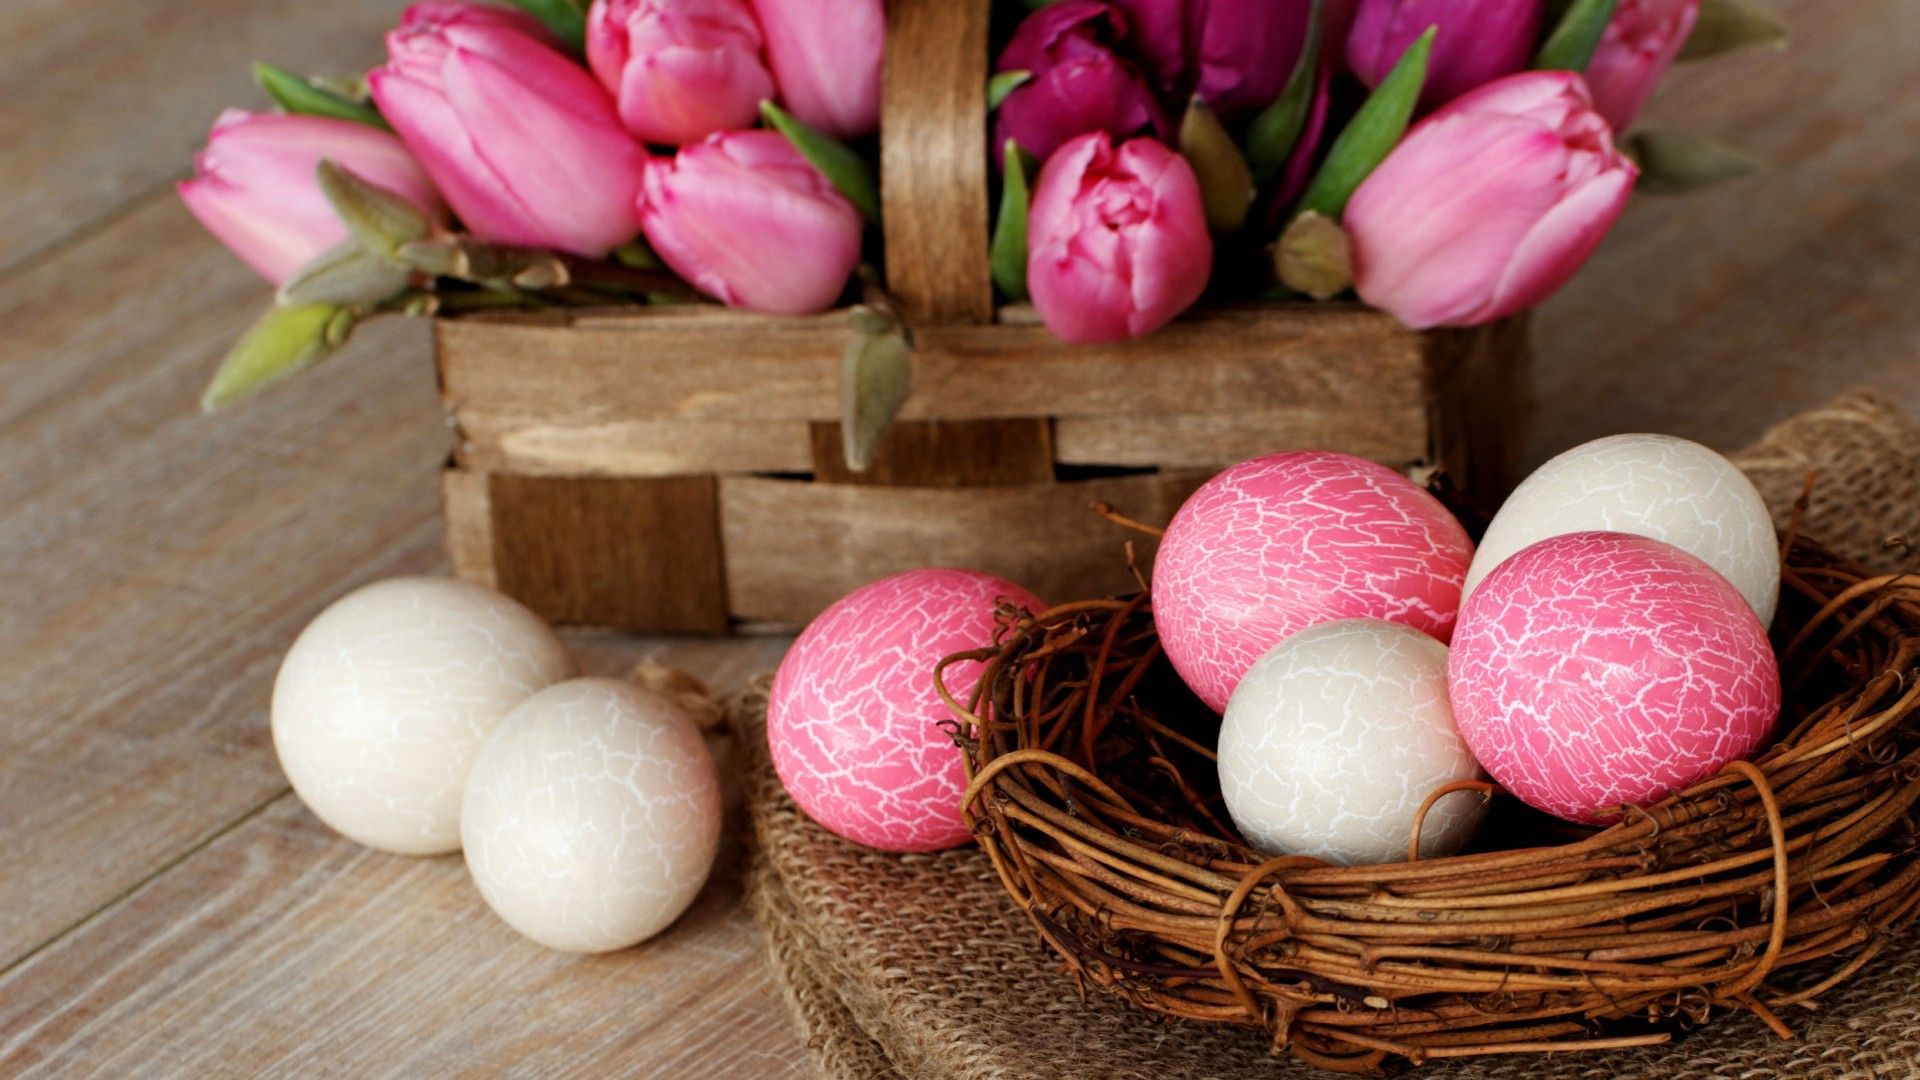 White and pink eggs for Easter wallpaper and image, picture, photo